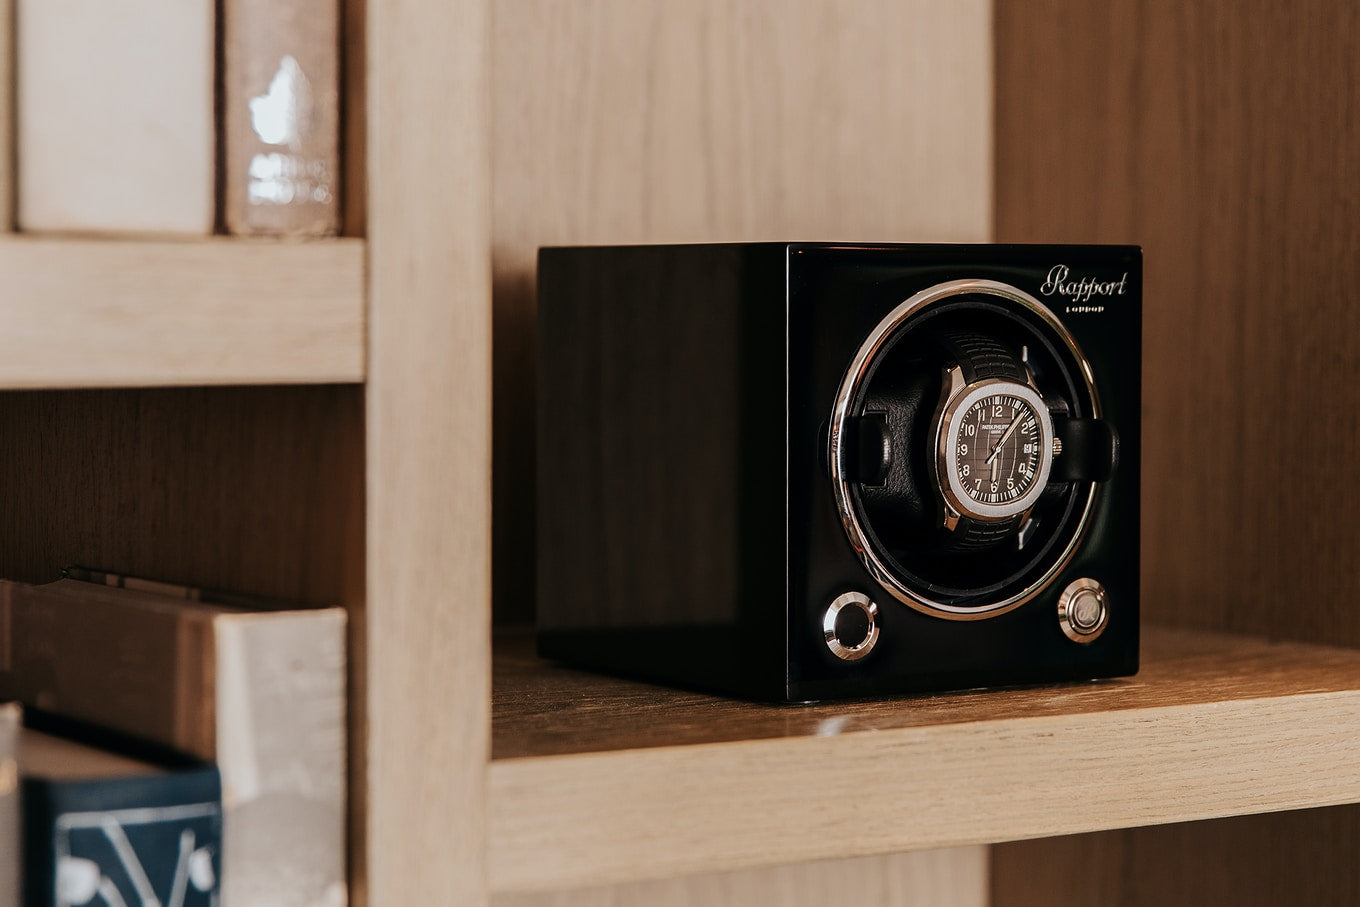 Article: The Dos & Don’ts of Watch Winders: What Should You Know About Watch Winders?